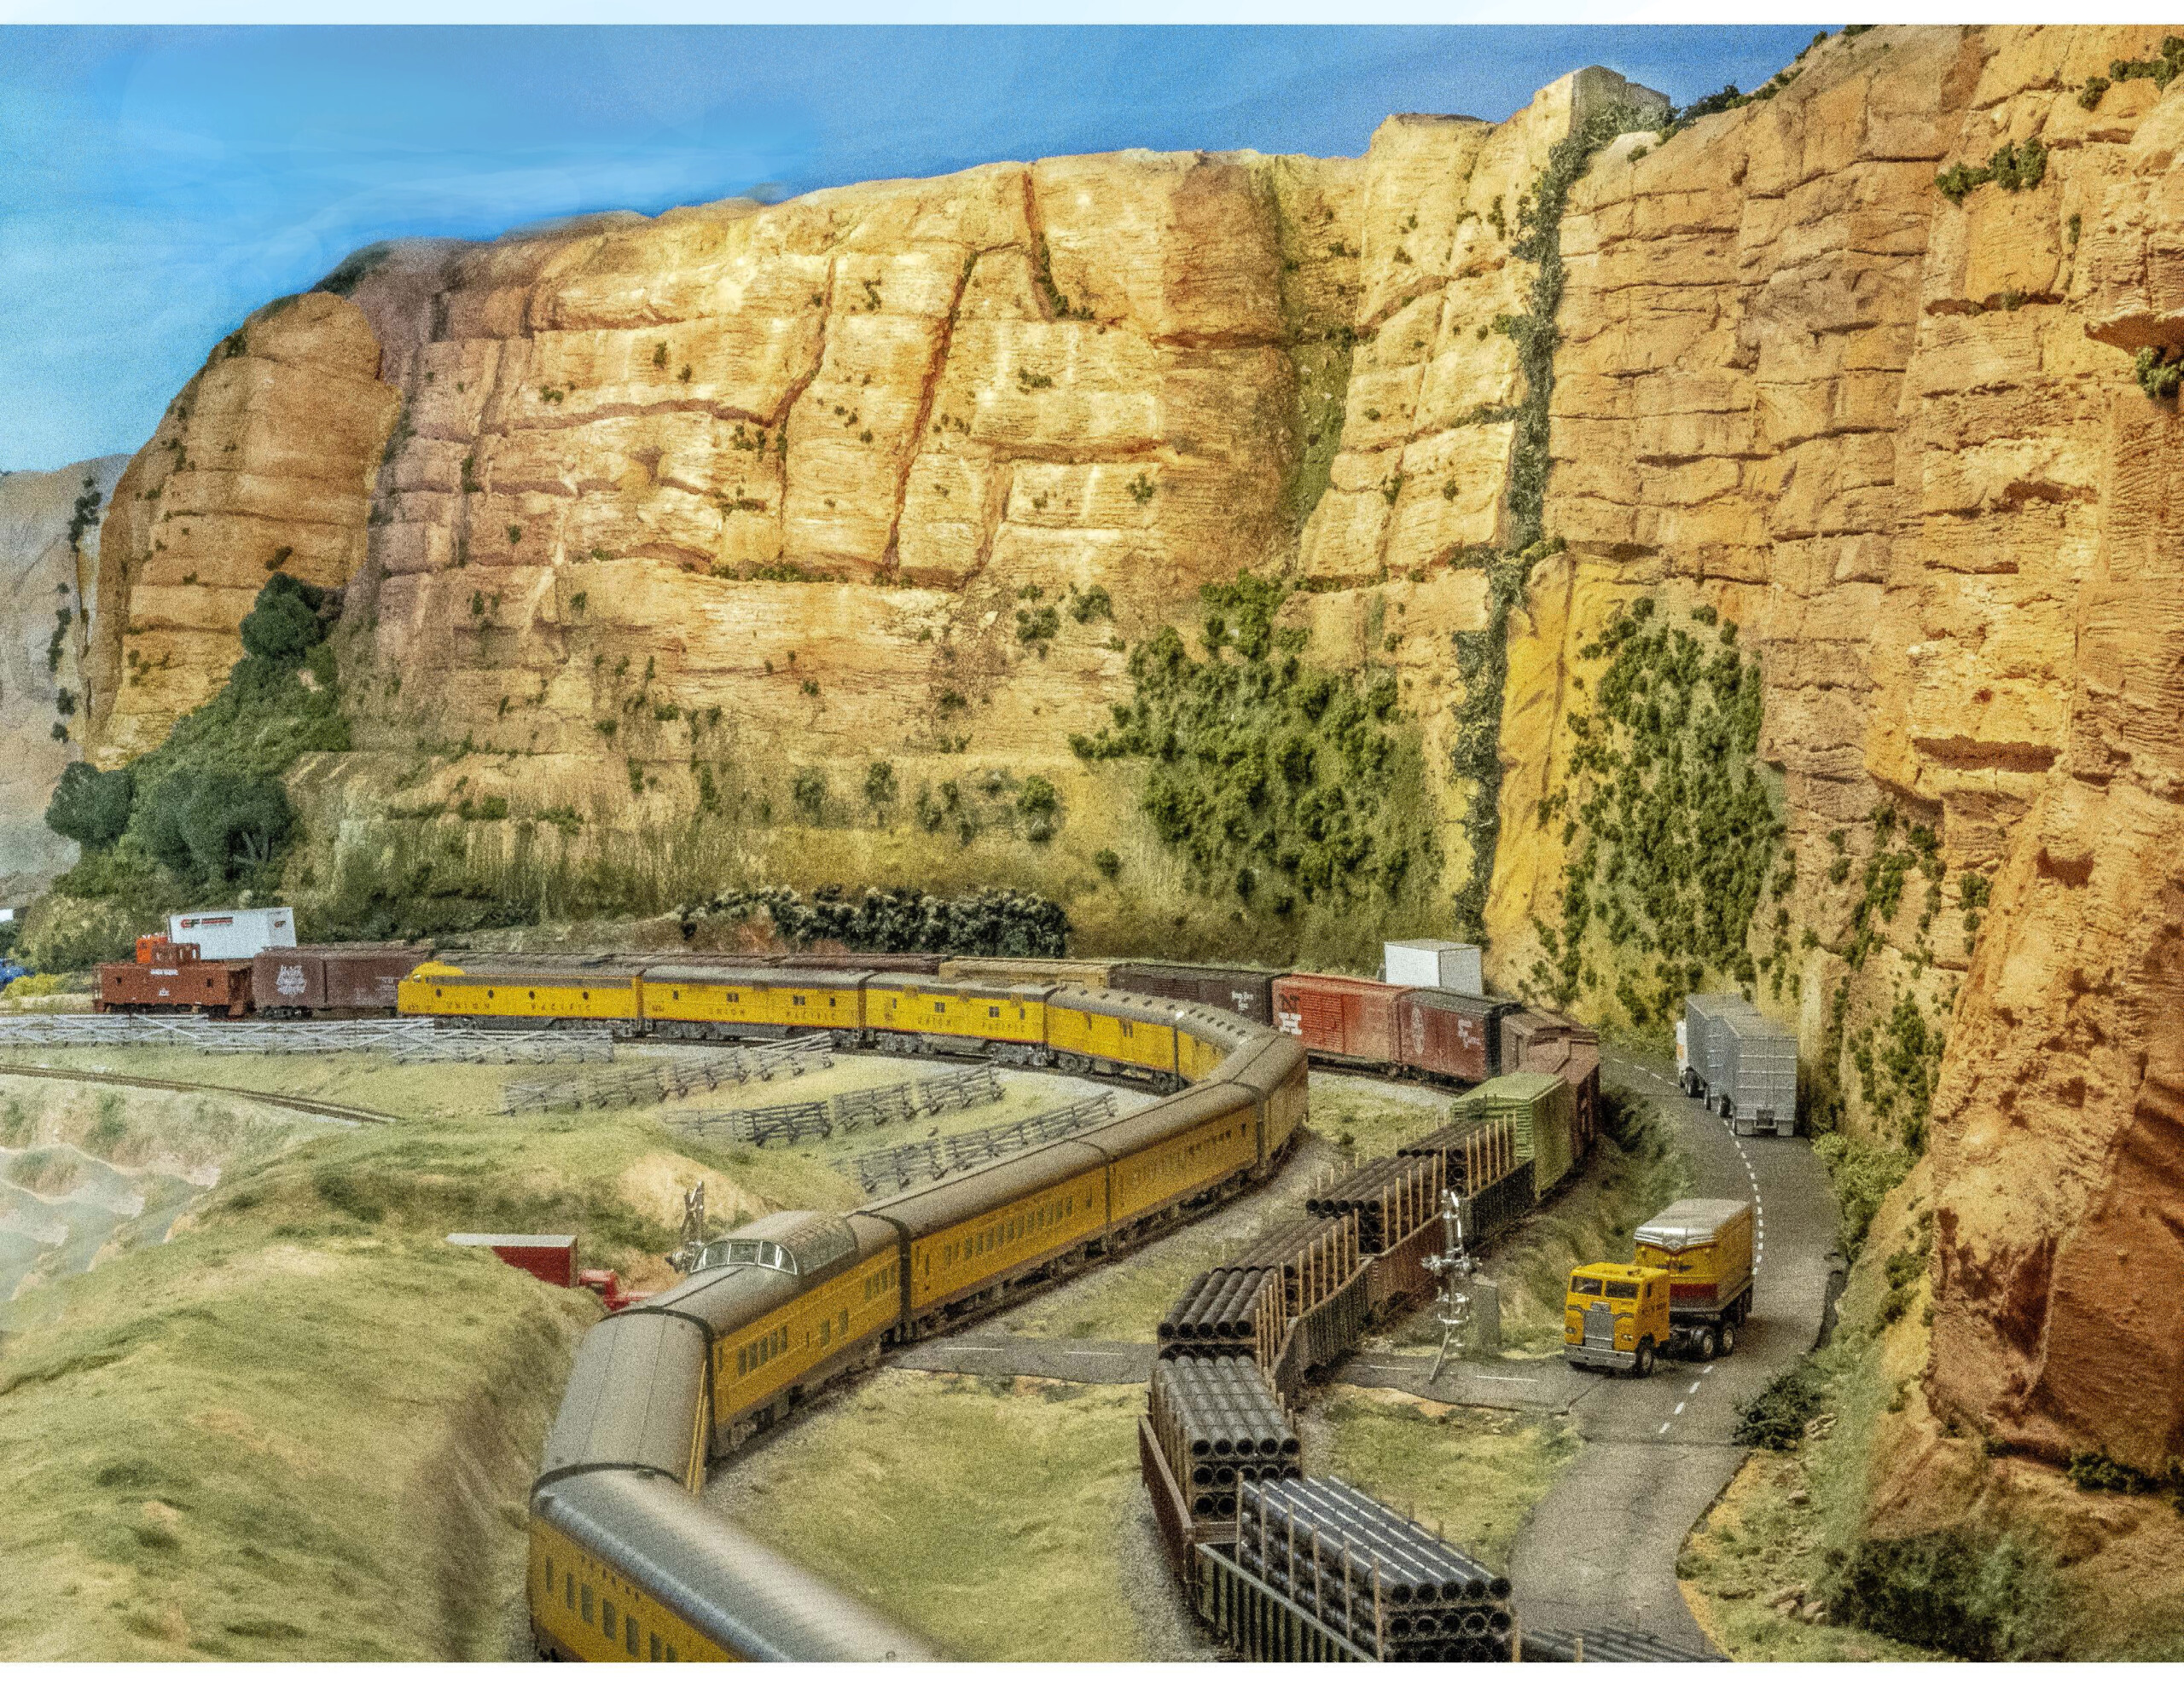 Two trains pass each other in a valley with a large cliff face in the background